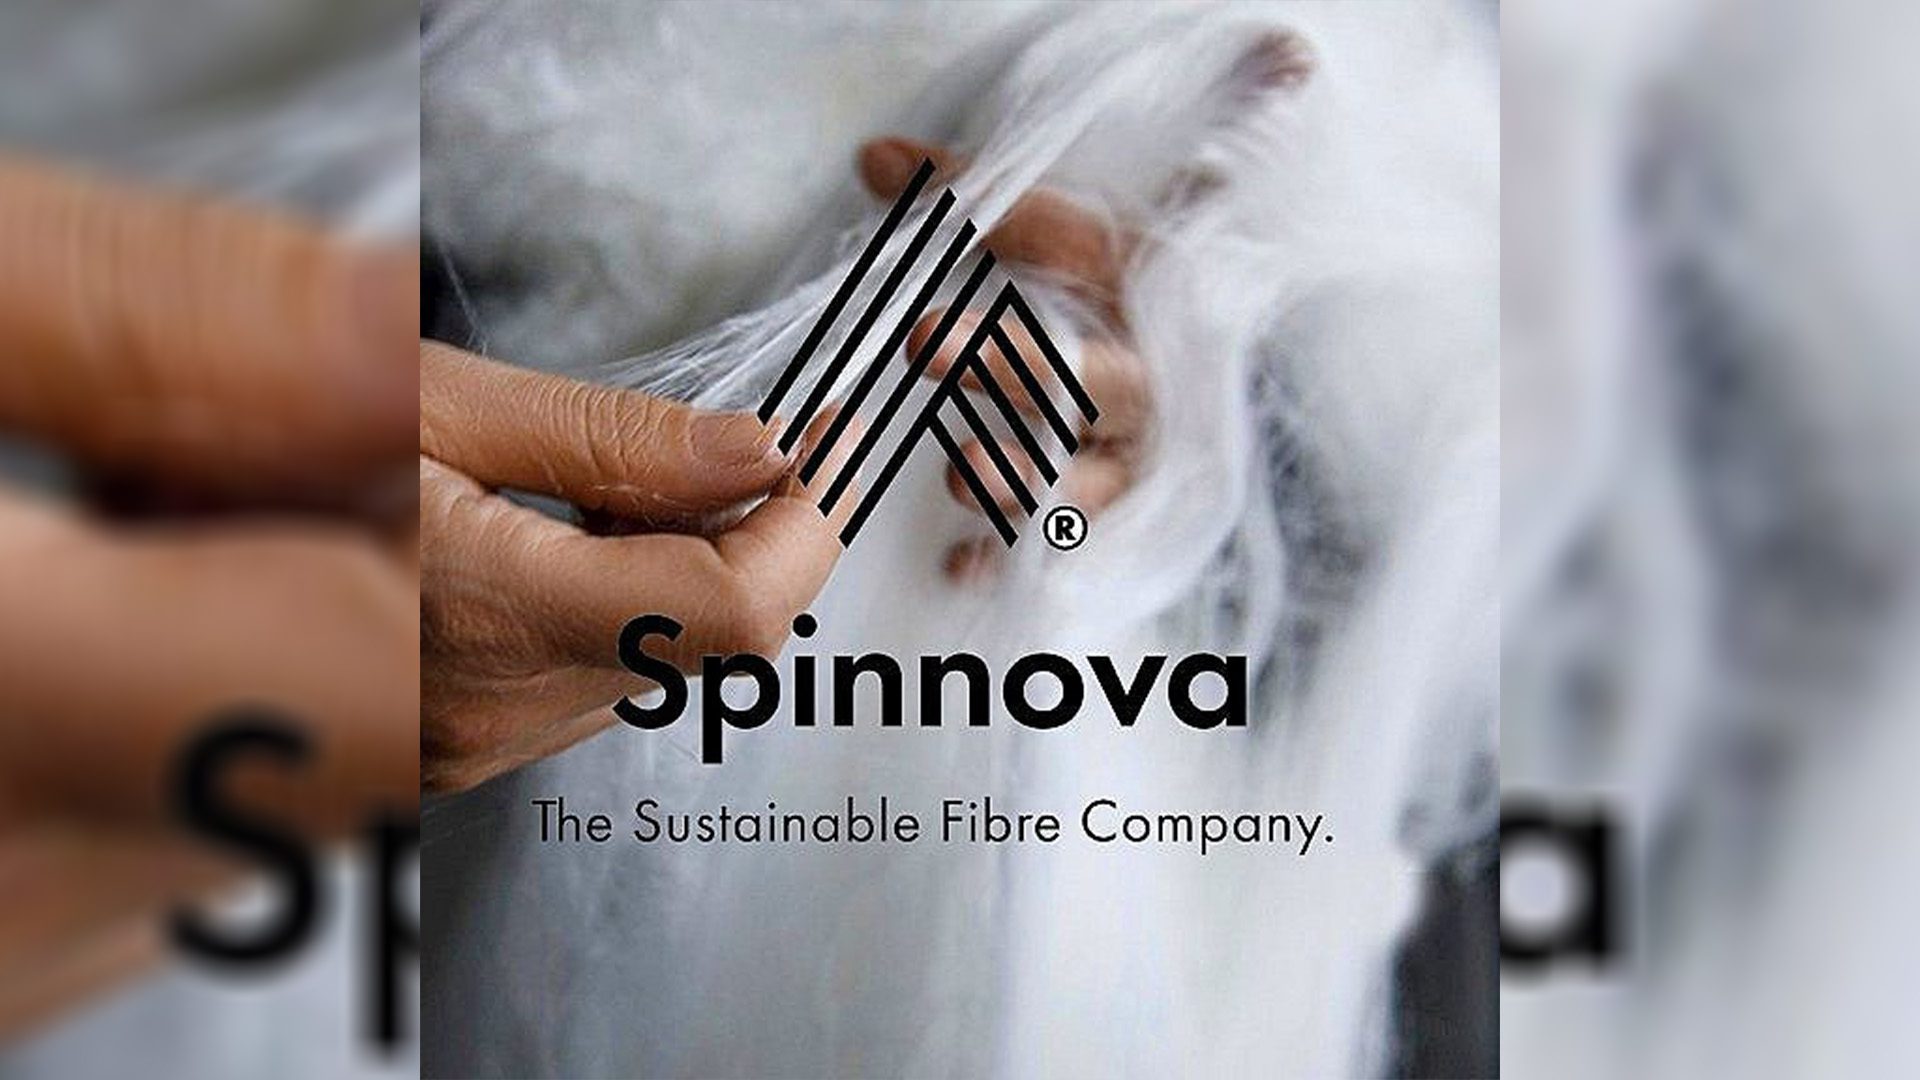 SPINNOVA turns raw wood pulp into ready-to-spin fibers